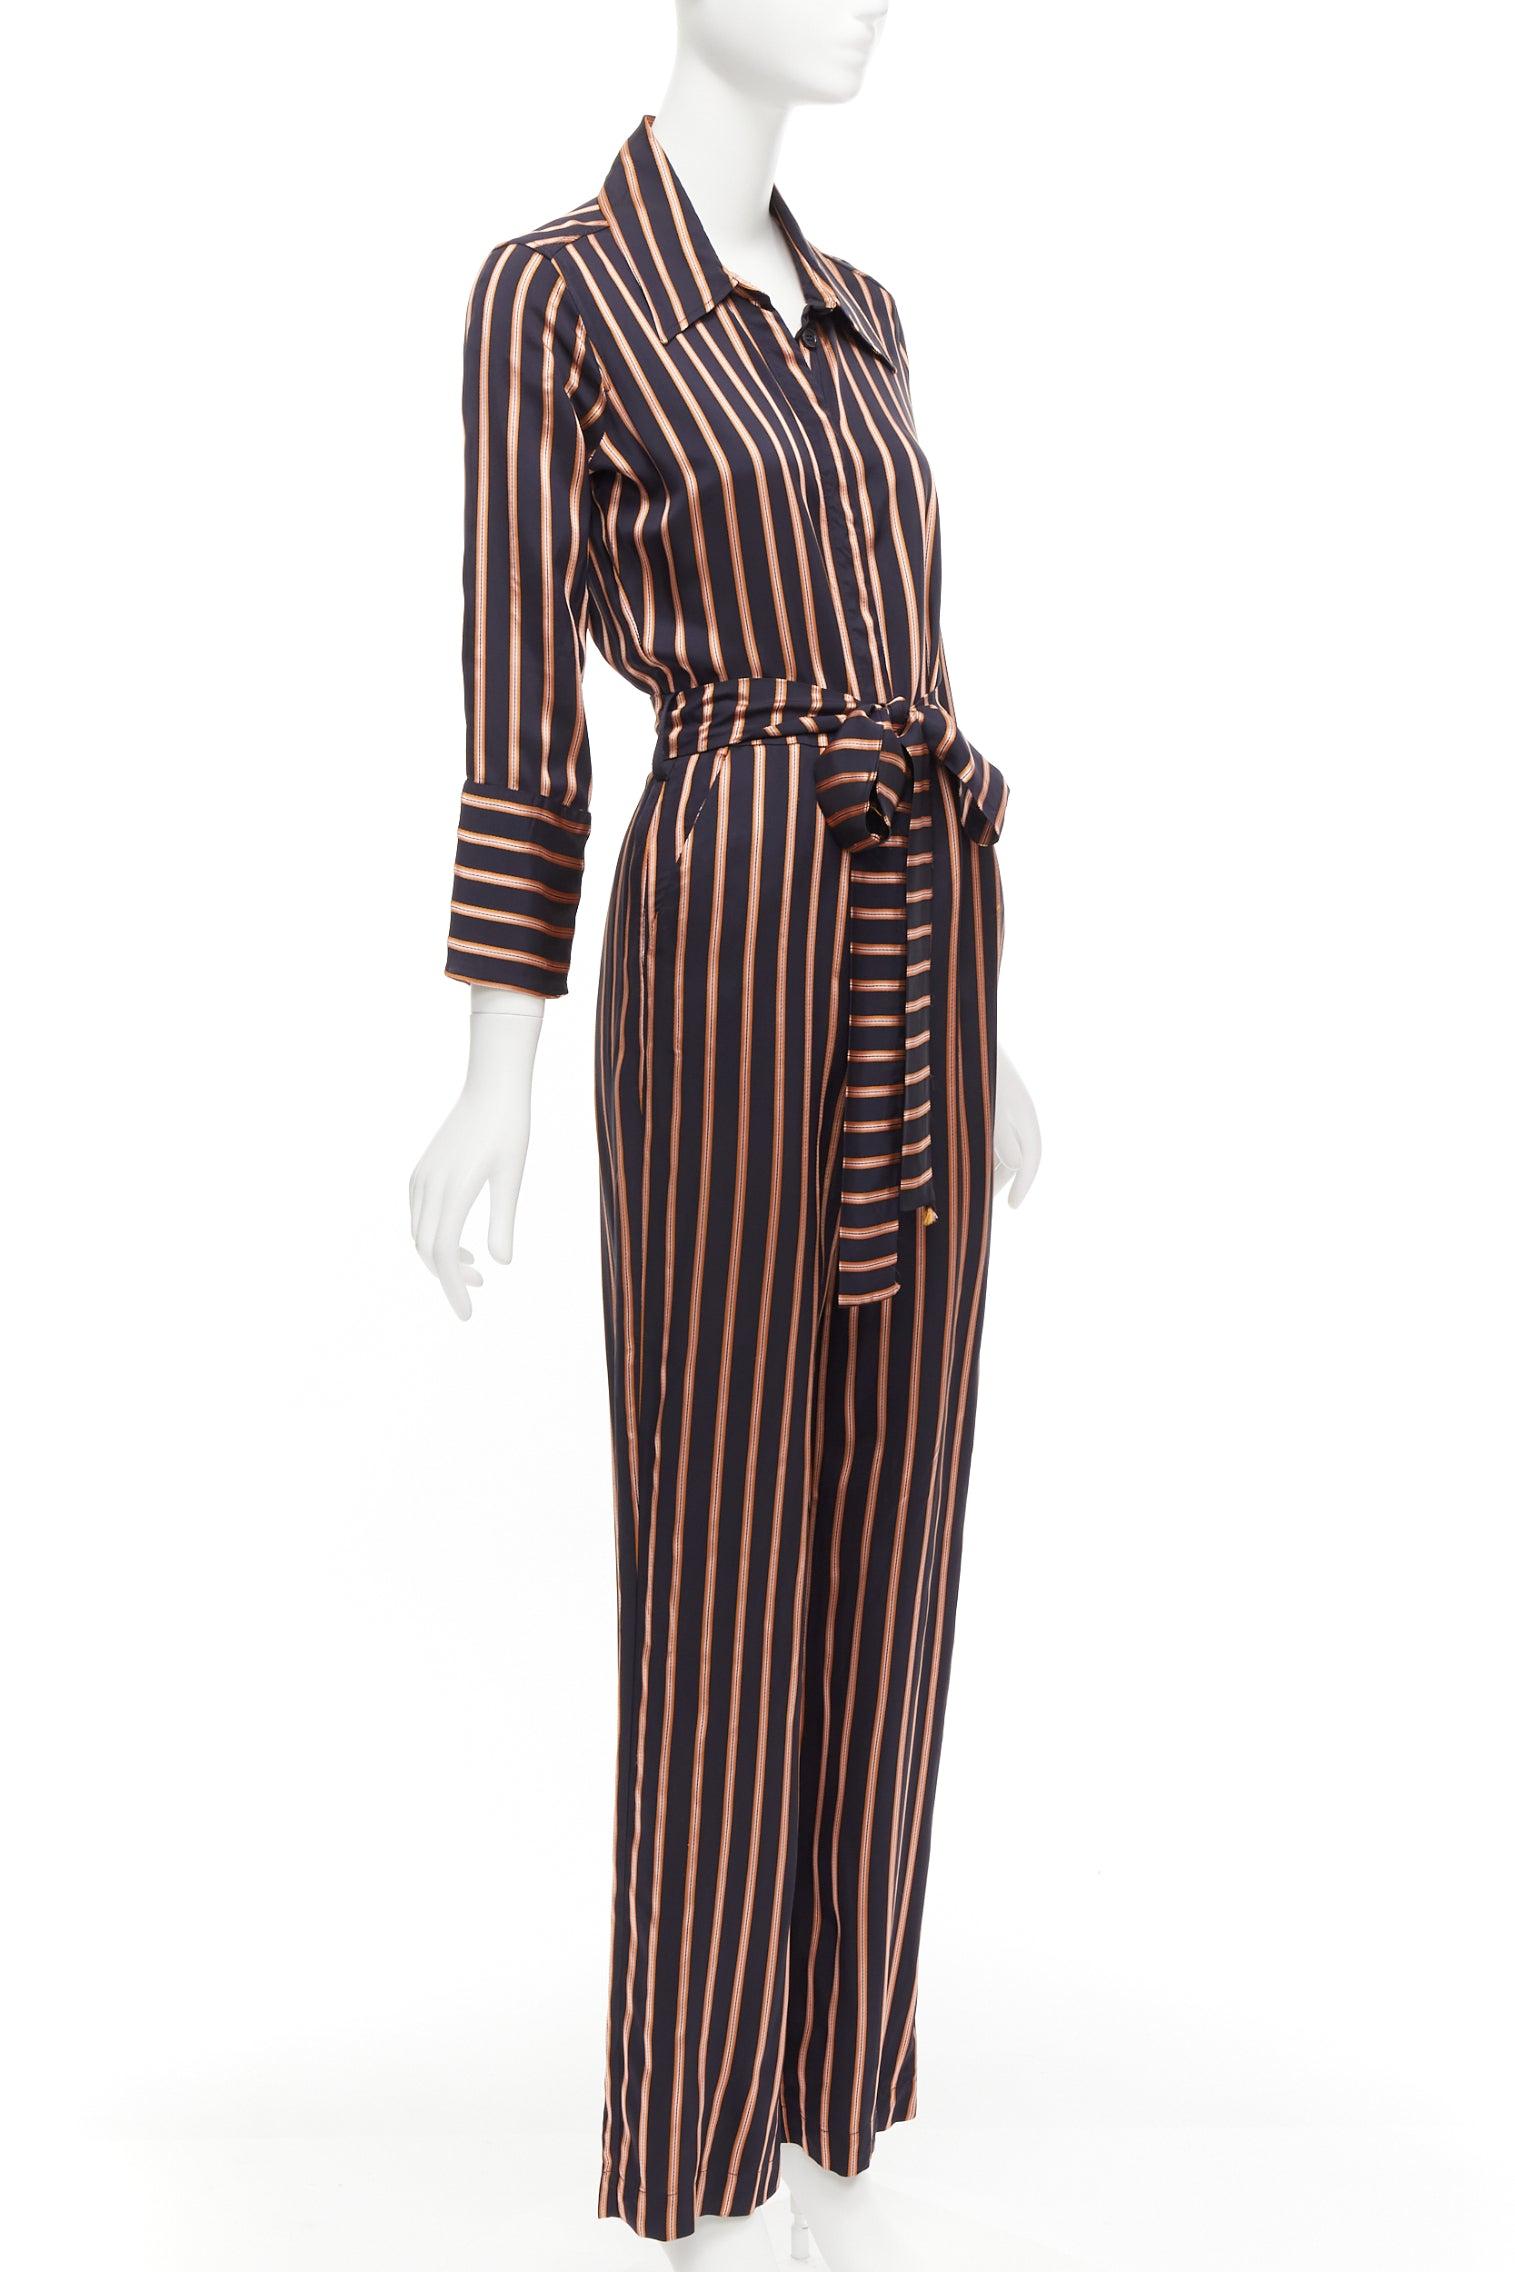 MIH JEANS Dexy brown black striped viscose tie belt jacquard jumpsuit S
Reference: CELG/A00378
Brand: MIH Jeans
Model: Dexy
Material: Viscose
Color: Brown, Black
Pattern: Striped
Closure: Self Tie
Extra Details: M.i.h Jeans' wide-leg 'Dexy' style is